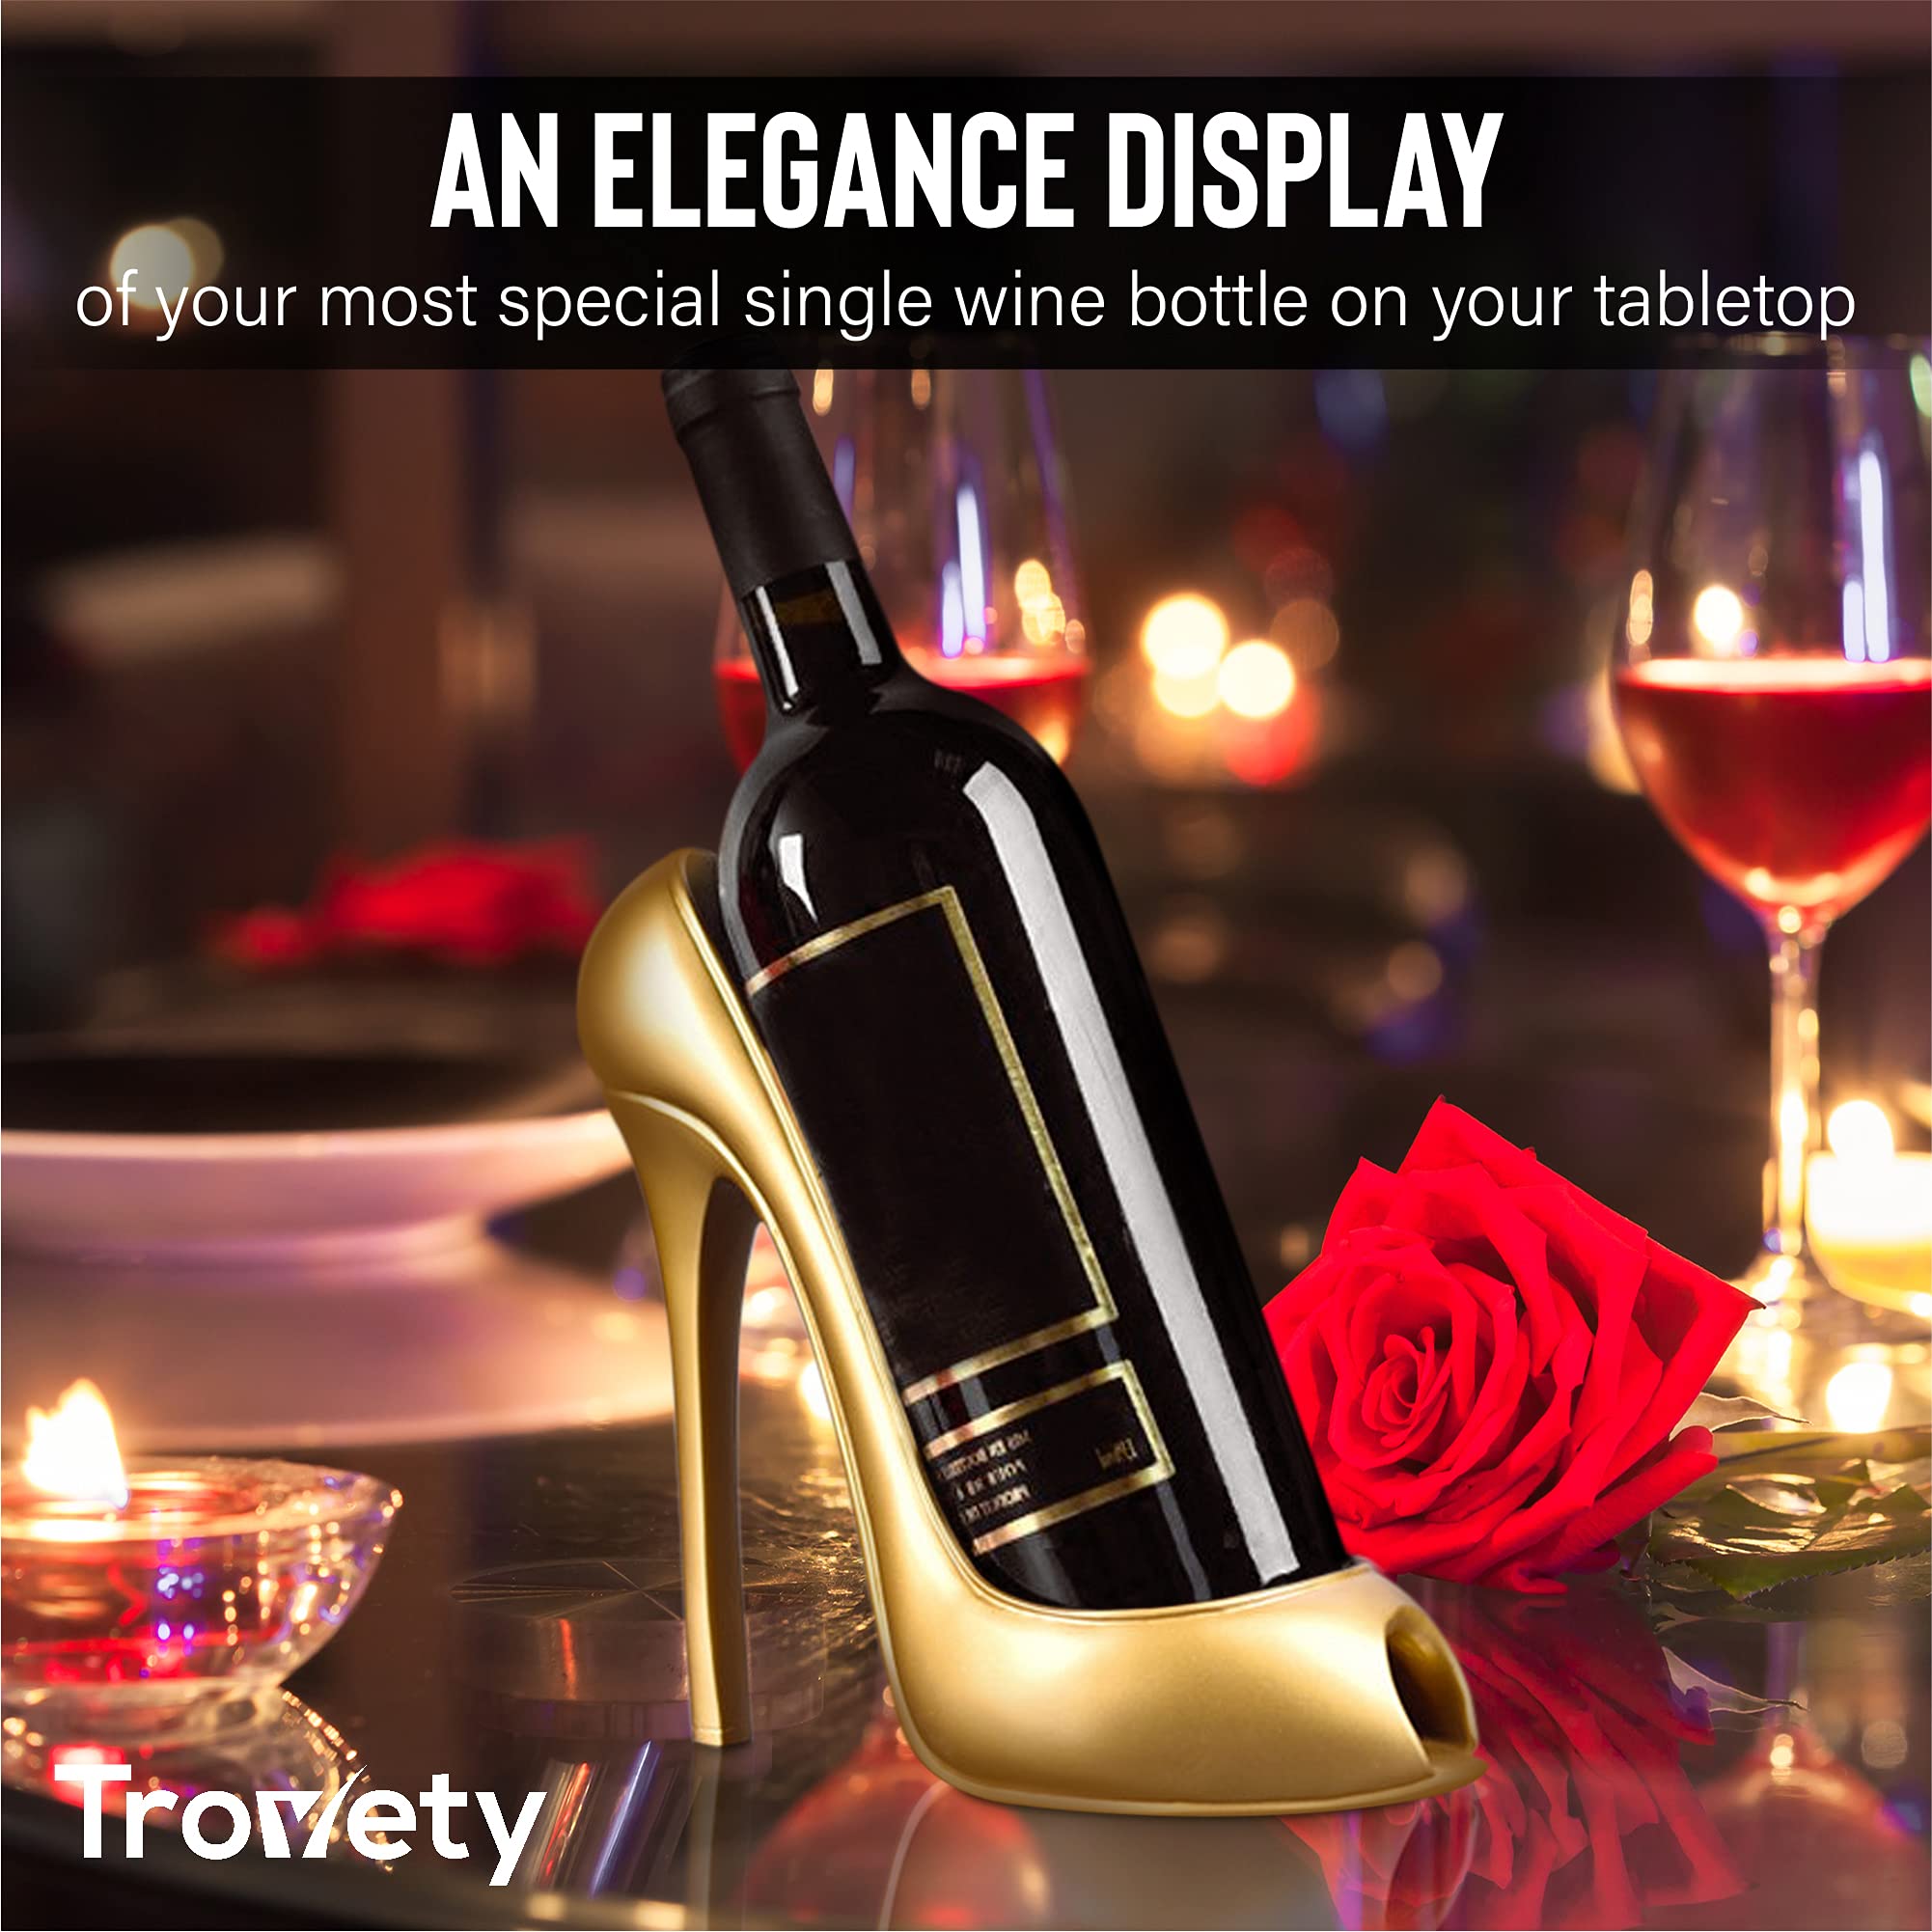 Trovety Shoe Wine Rack Holder - Bottle Keeper with High-Heel Design - Display & Storage Accessories - Table Centerpiece & Home Decorations for Kitchen, Restaurant, Bar, Hotel (Champagne)